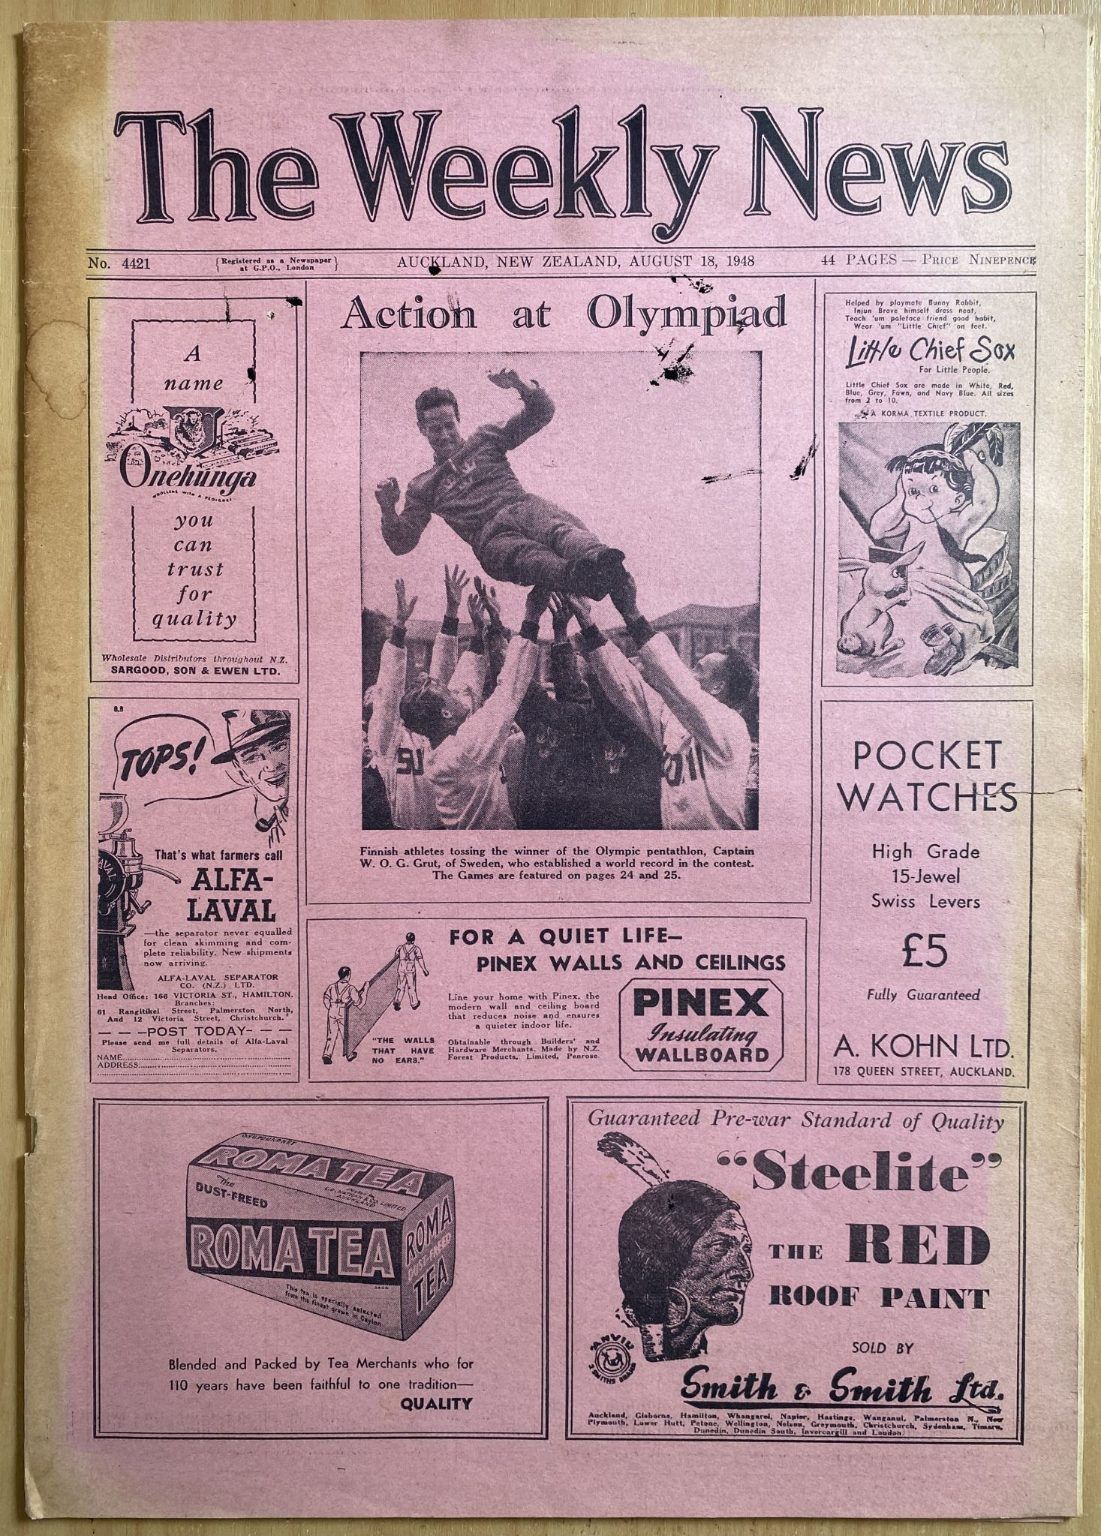 OLD NEWSPAPER: The Weekly News - No. 4421, 18 August 1948